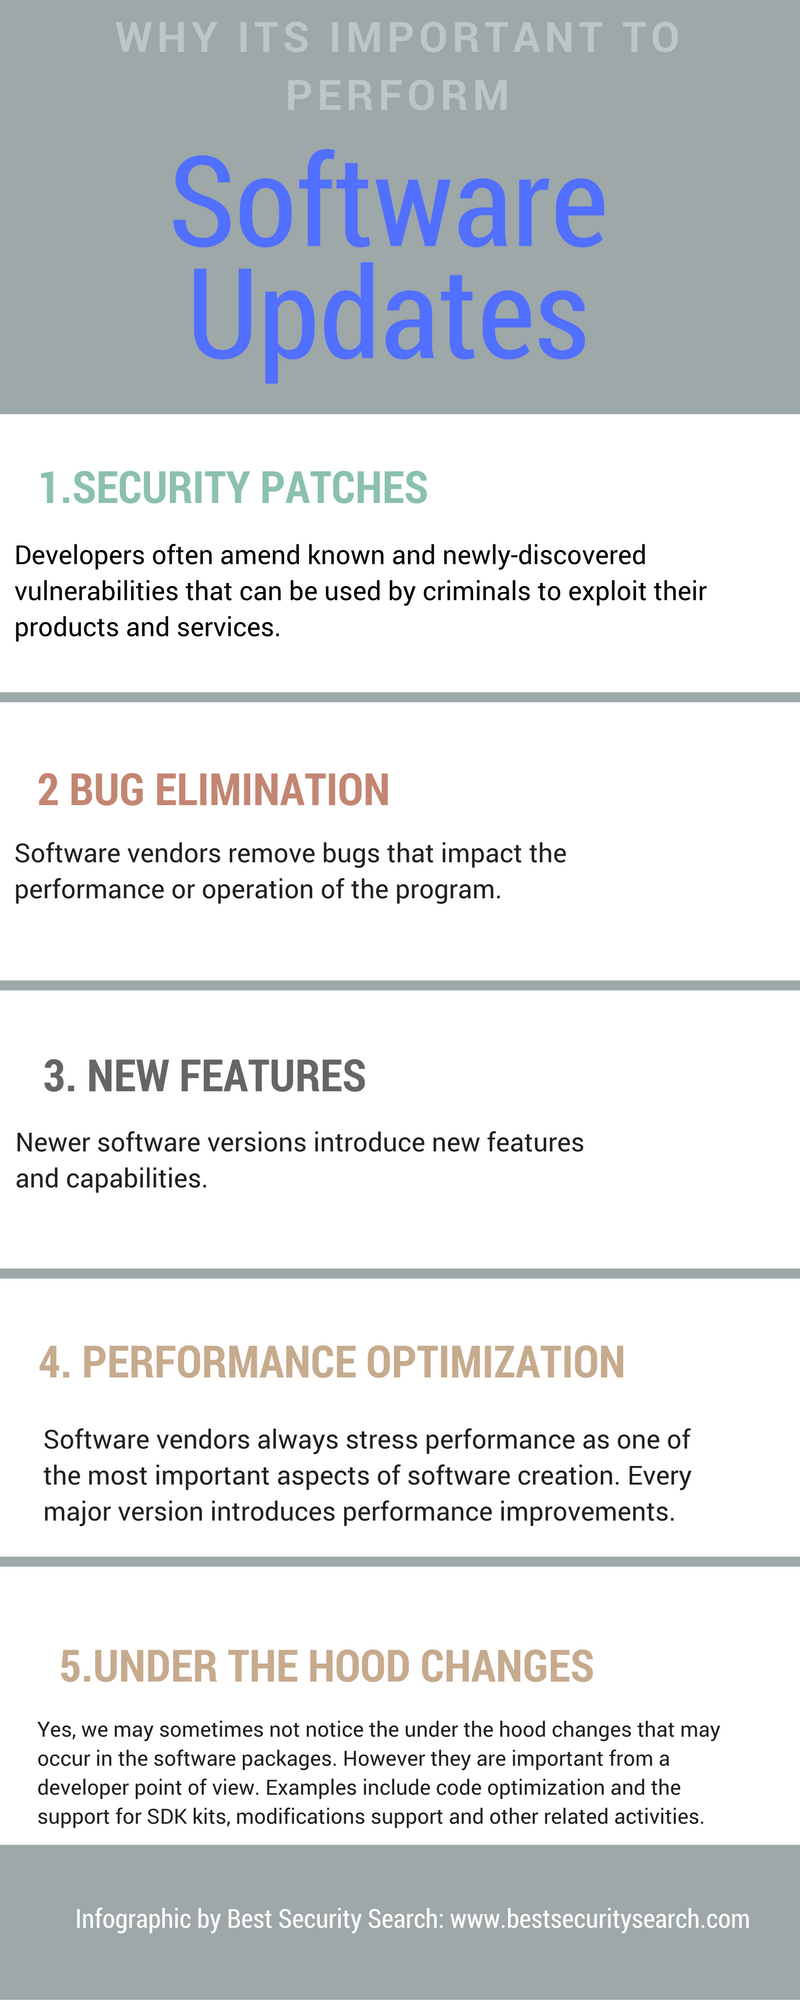 software-updates-infographic